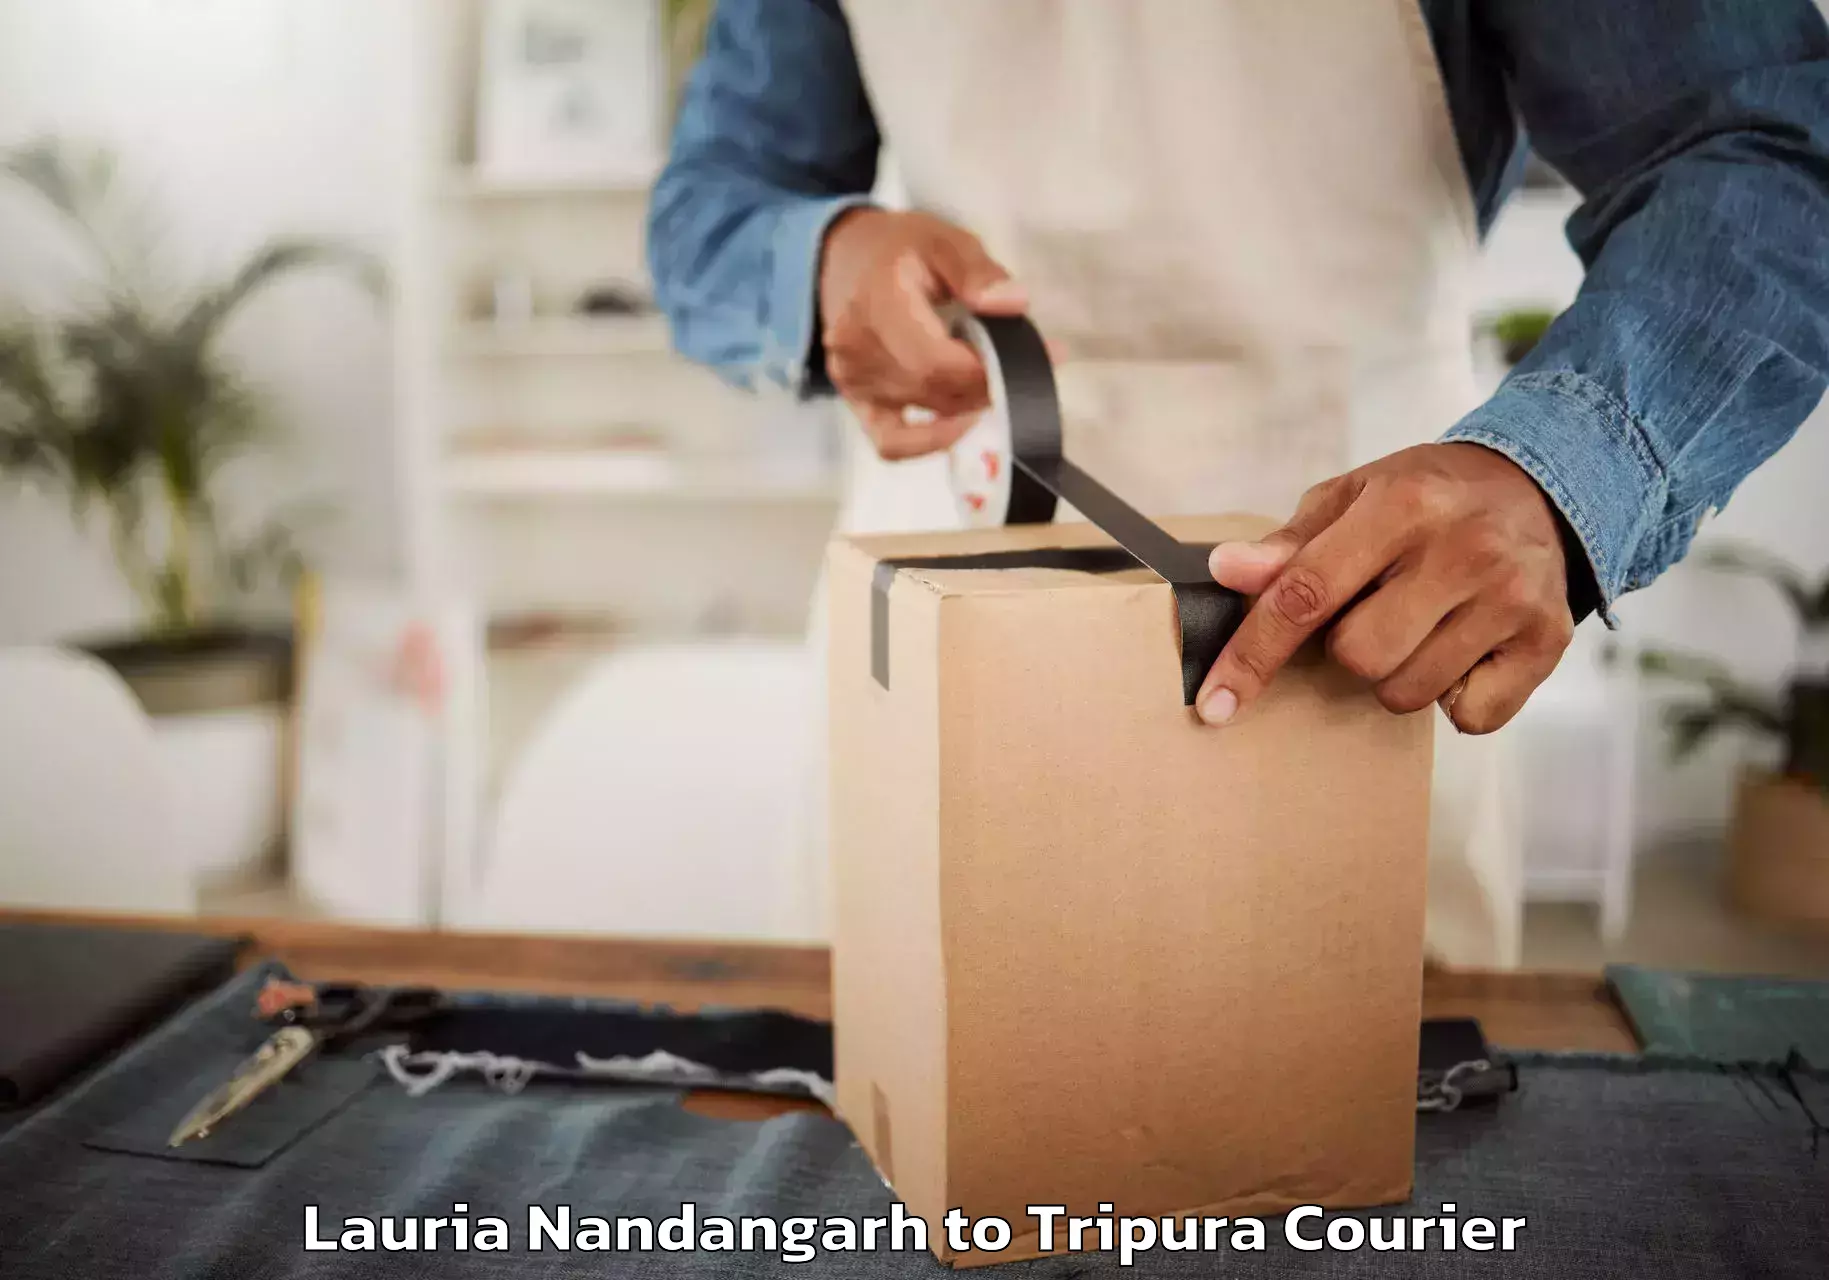 Furniture moving assistance Lauria Nandangarh to South Tripura